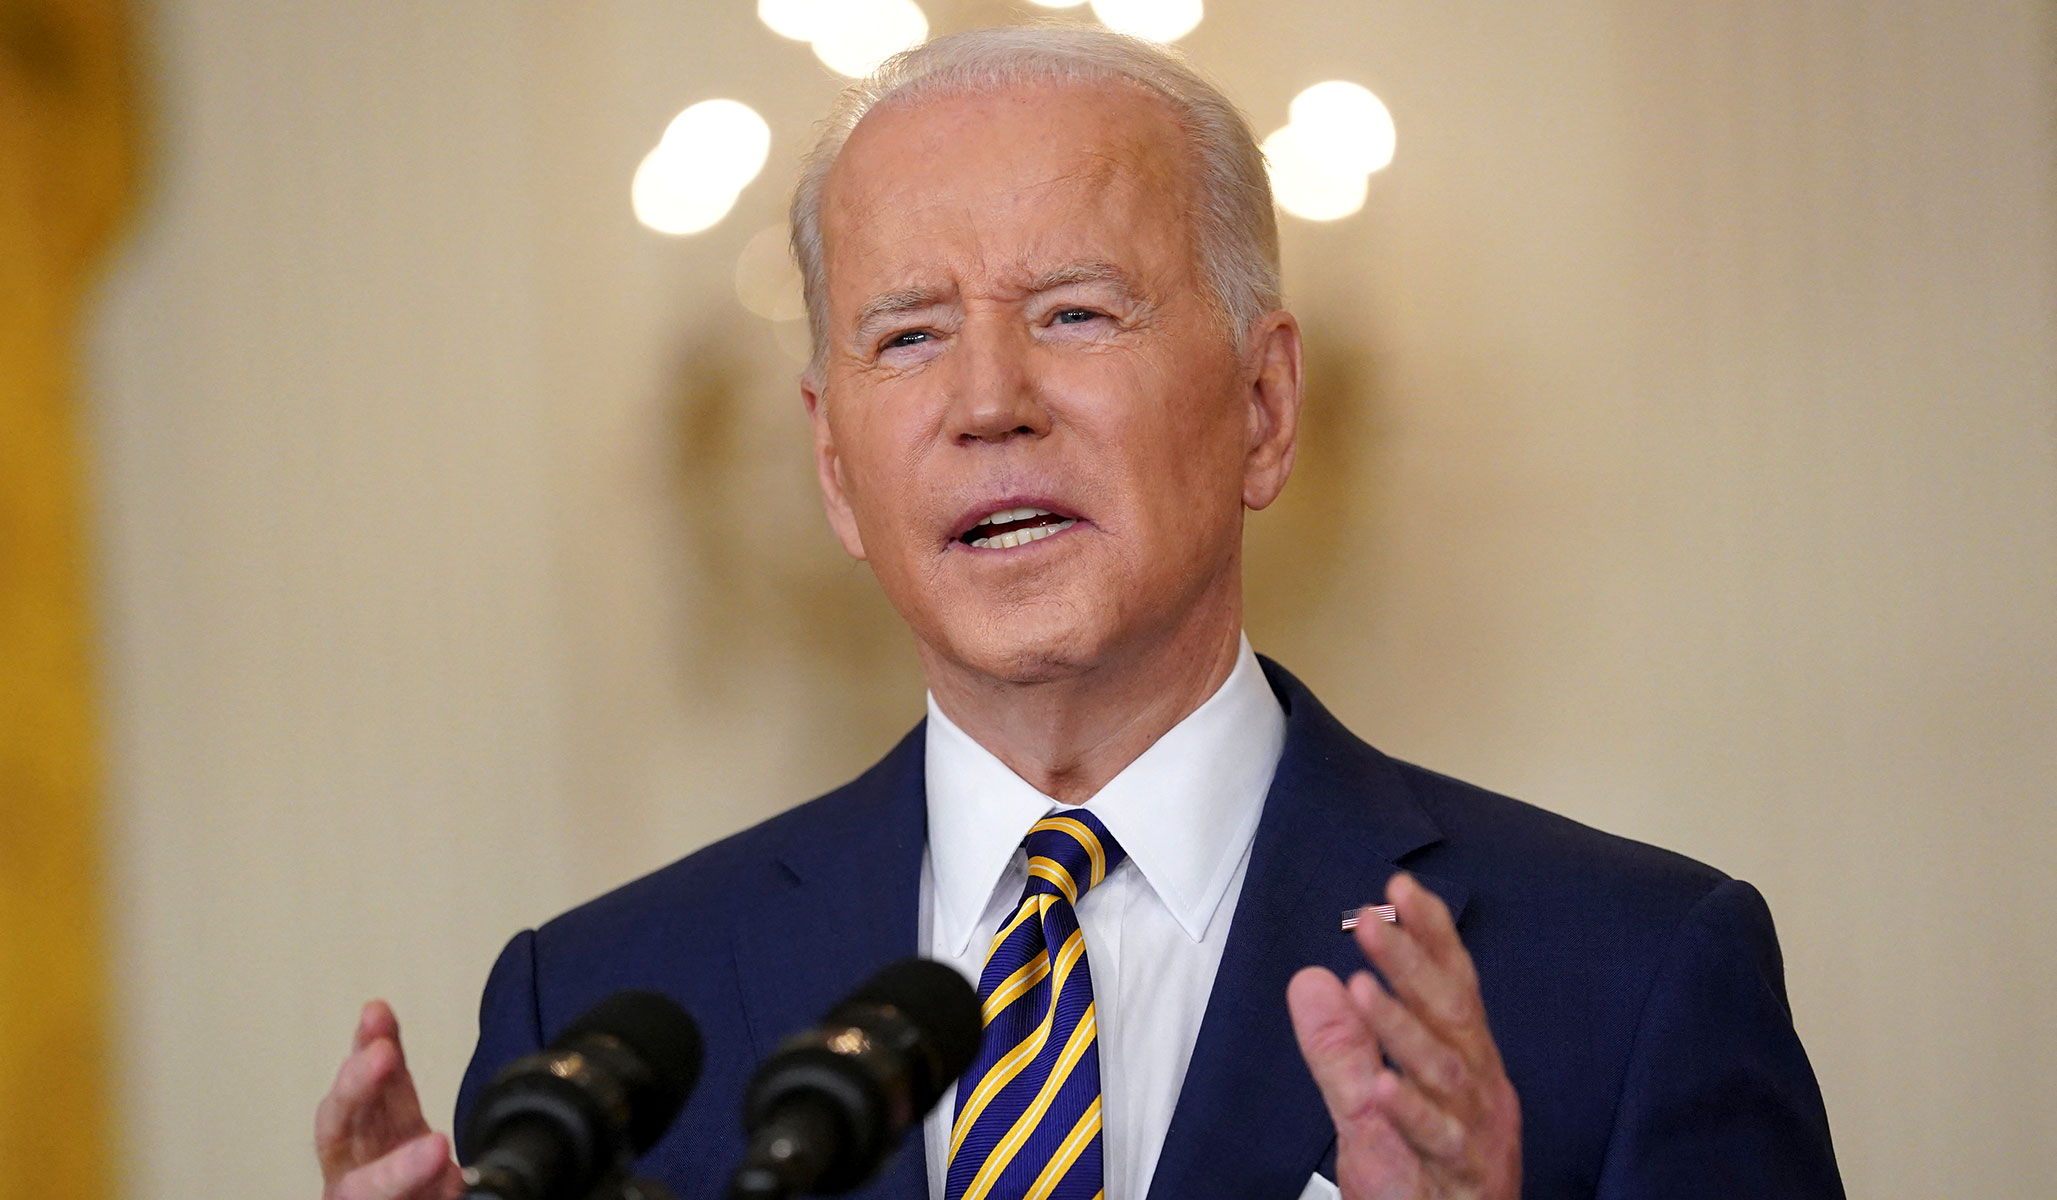 Biden Concedes Dems Must Break Up Build Back Better into 'Chunks' to Rescue Stalled Agenda